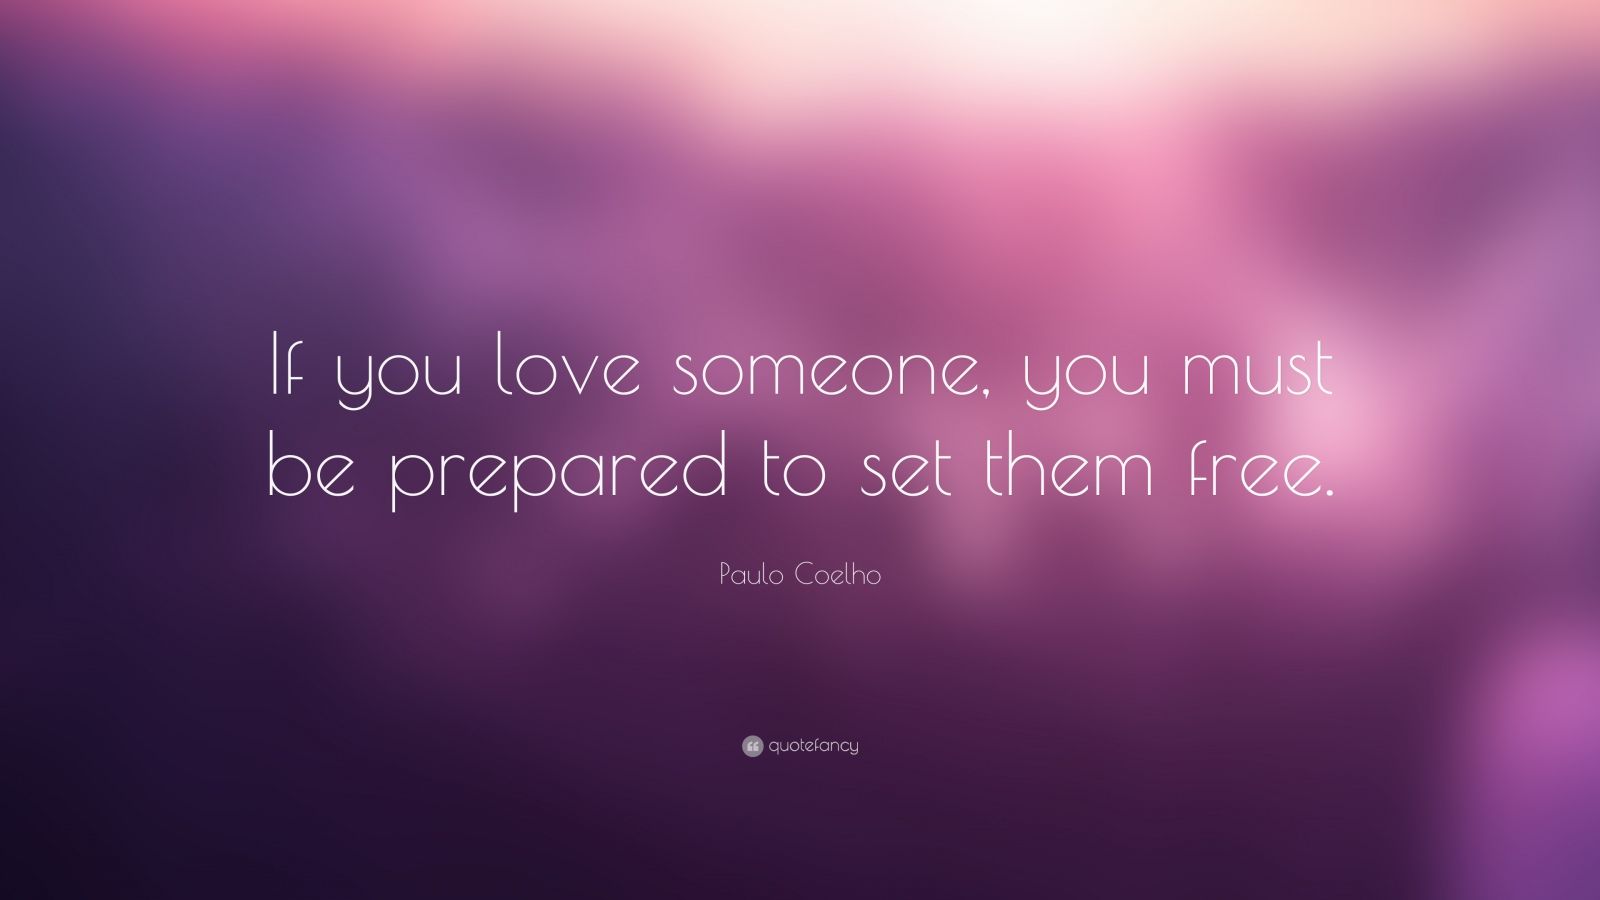 Paulo Coelho Quote “If you love someone you must be prepared to set